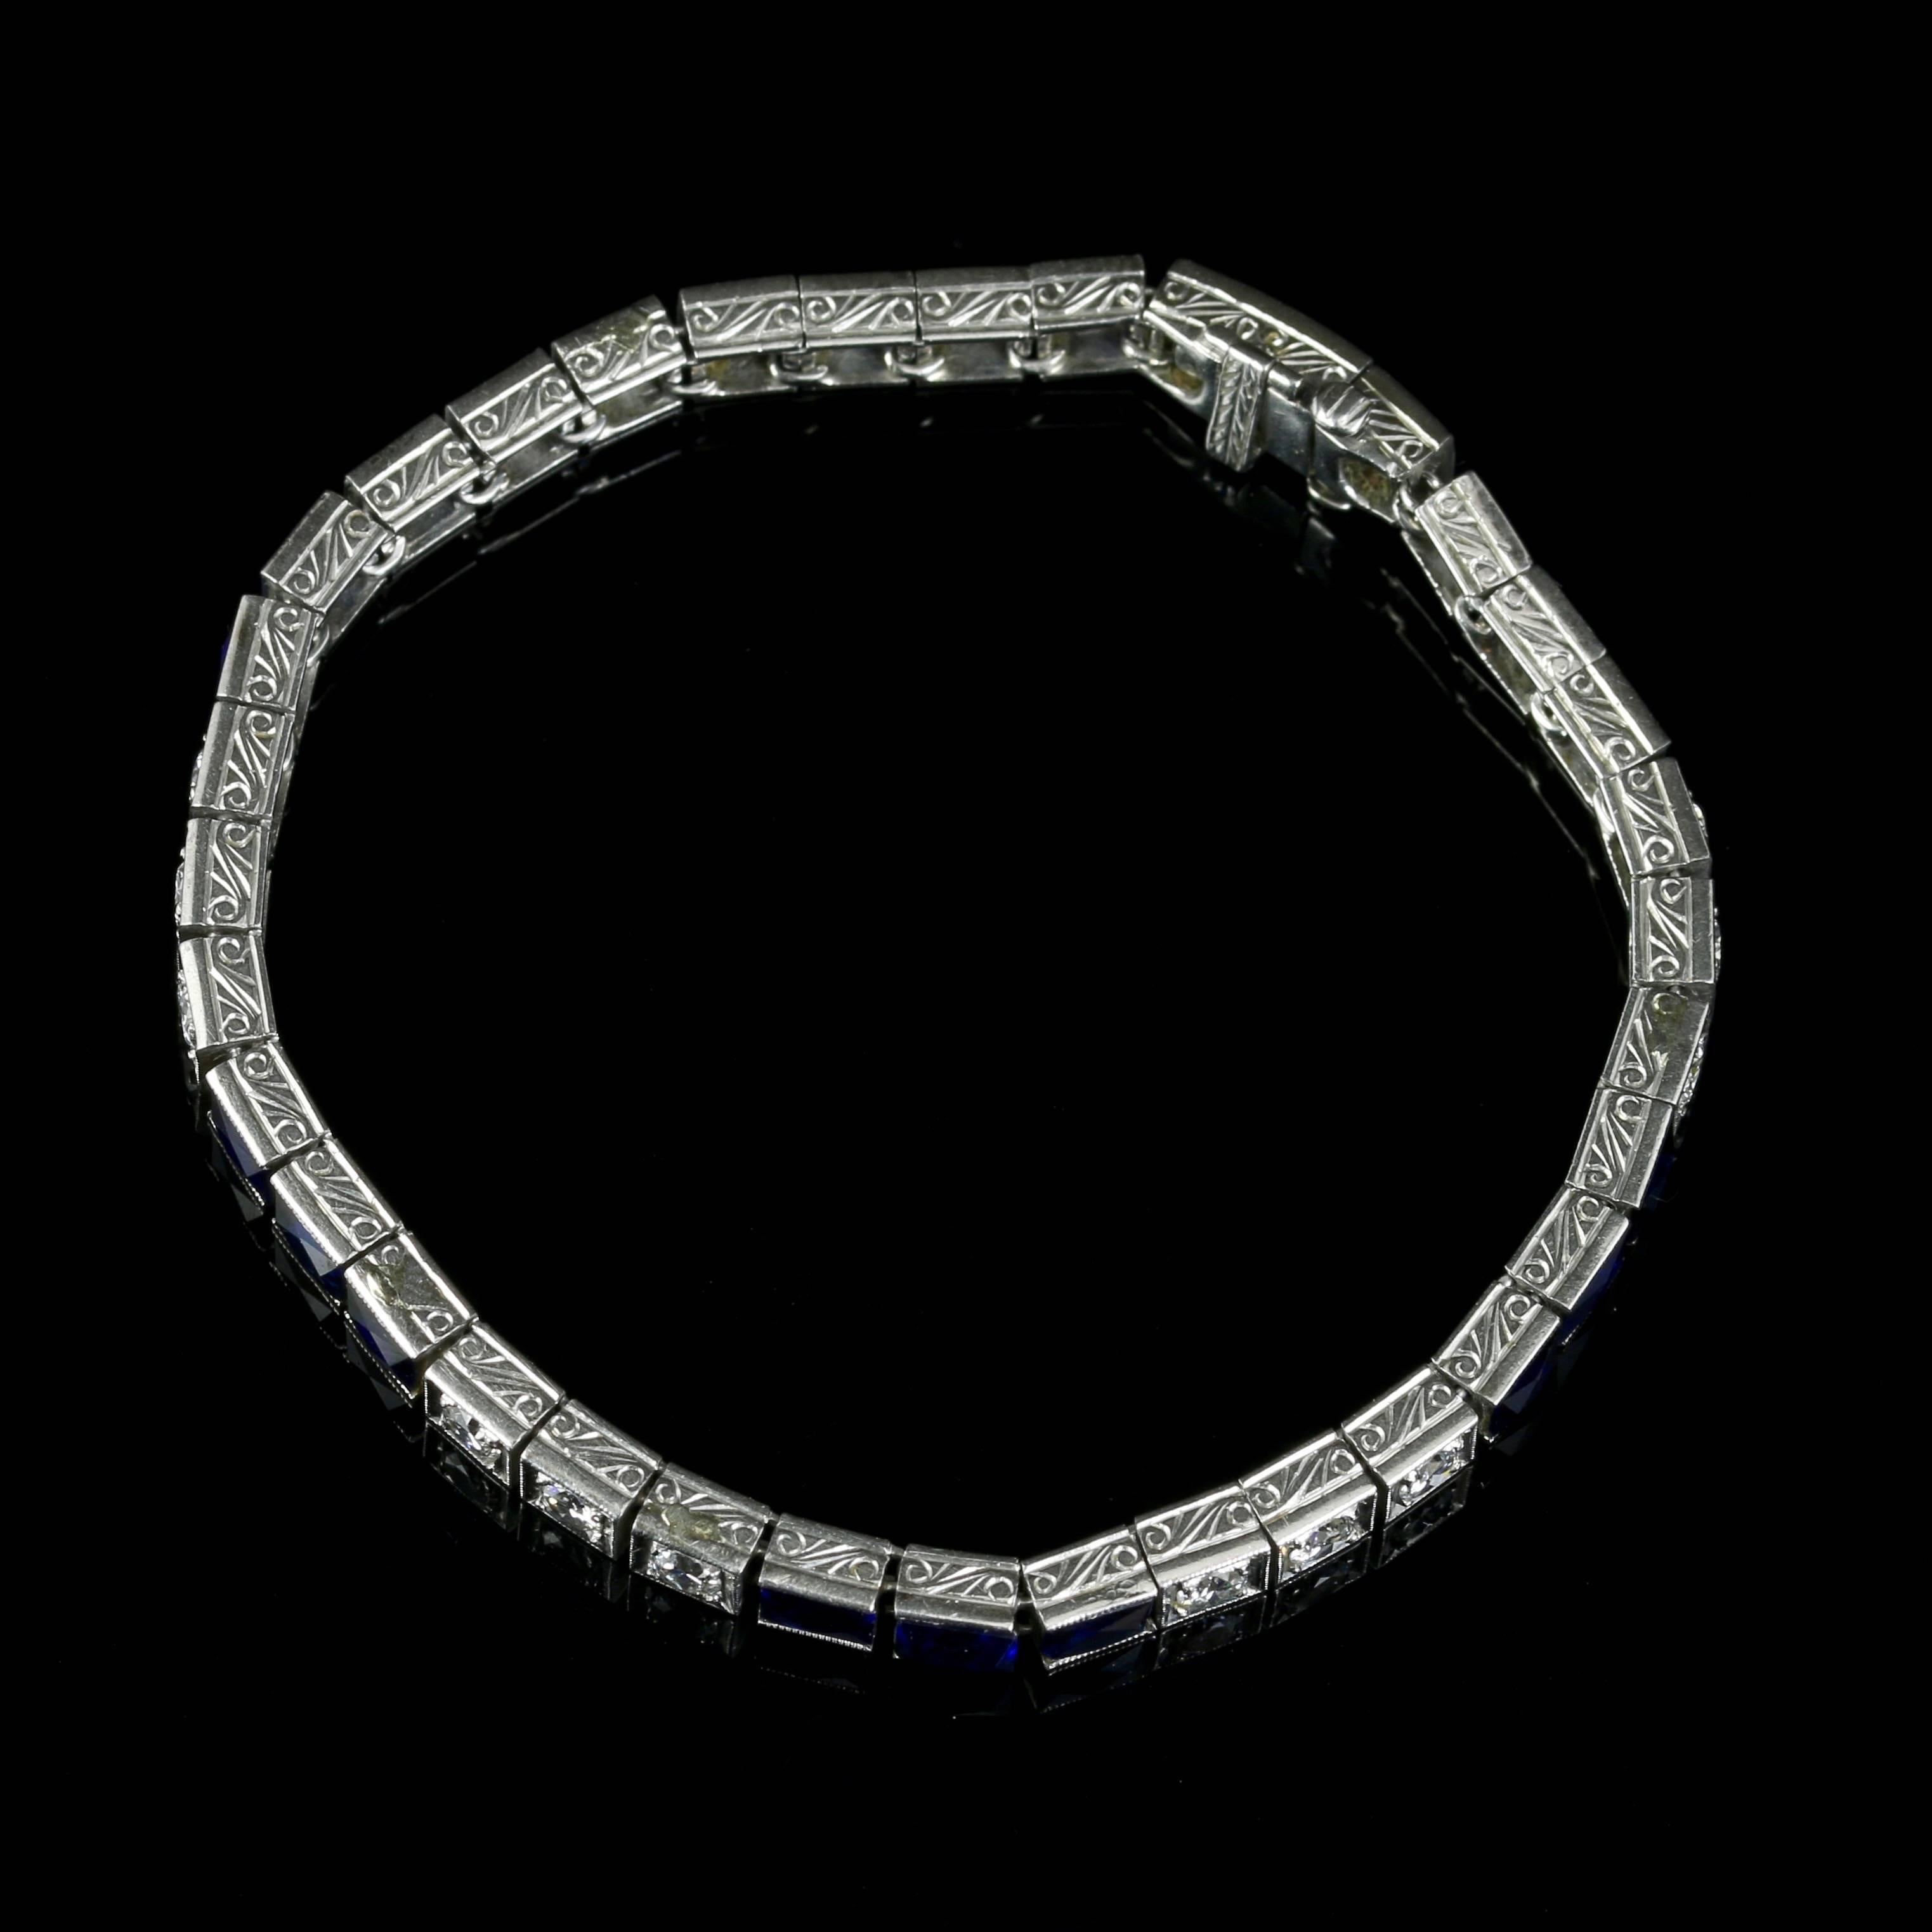 This fabulous Art Deco all Platinum 18ct white gold bracelet is set with 10.80ct of the most beautiful highly prized square cut Sapphires complimented by Old Cut Diamonds.

There are 1.70ct of Diamonds in total, each Diamond is 0.10ct.

Set with the